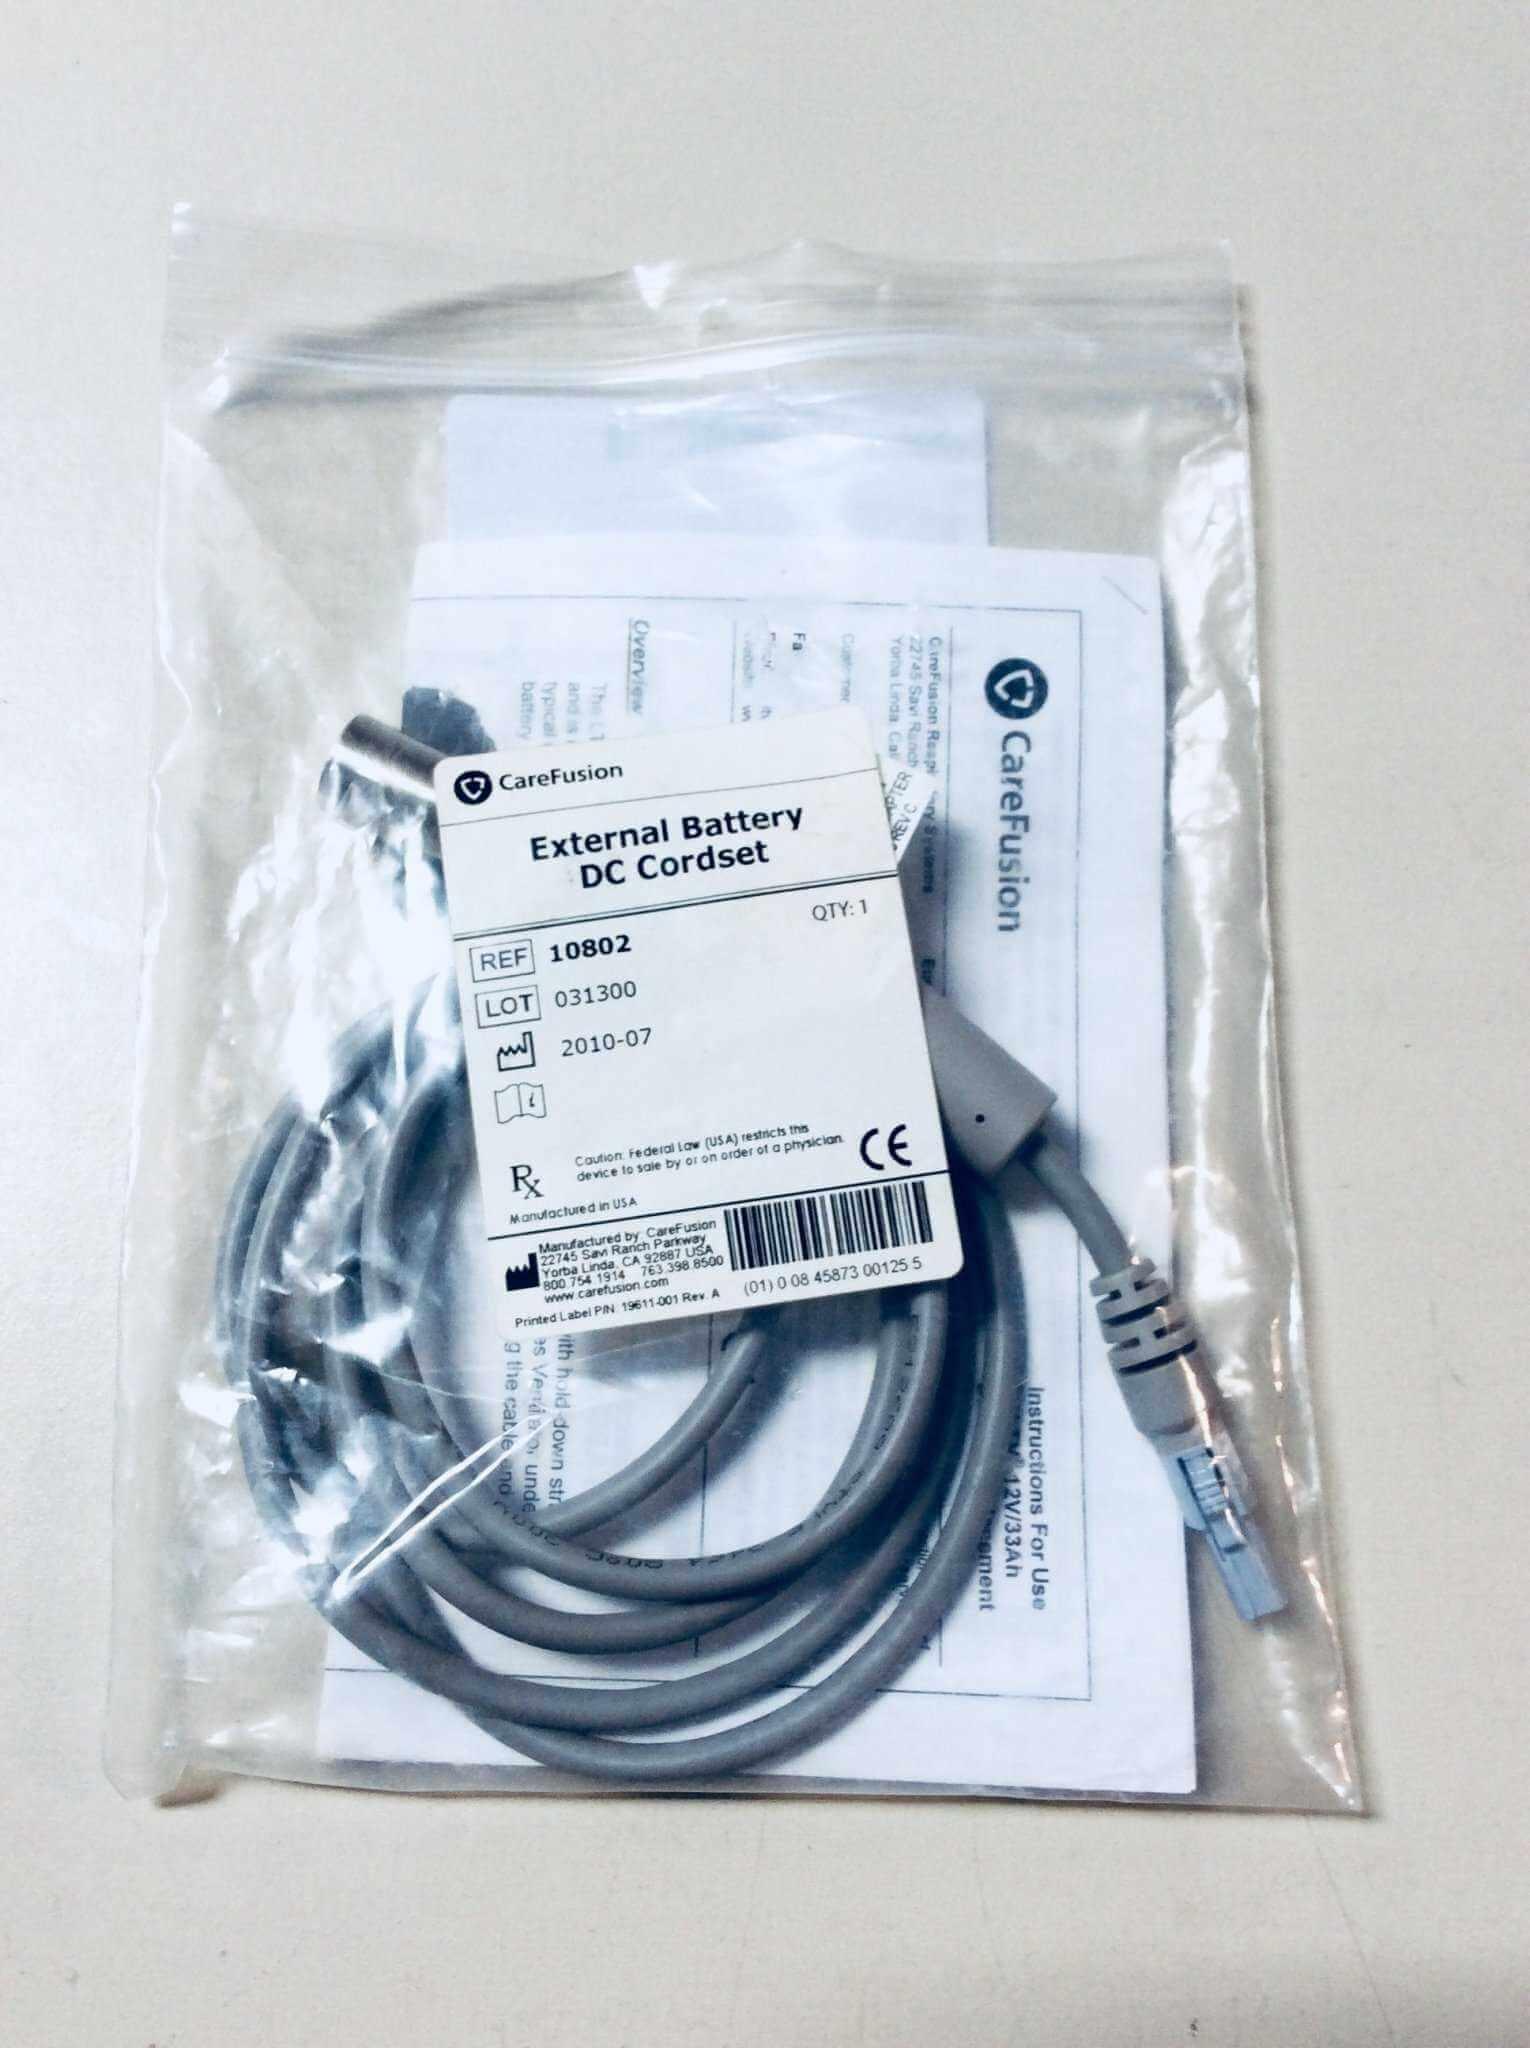 NEW CareFusion Pulmonetic Systems LTV Medical Ventilator External Battery DC Cordset 10802 Warranty FREE Shipping - MBR Medicals